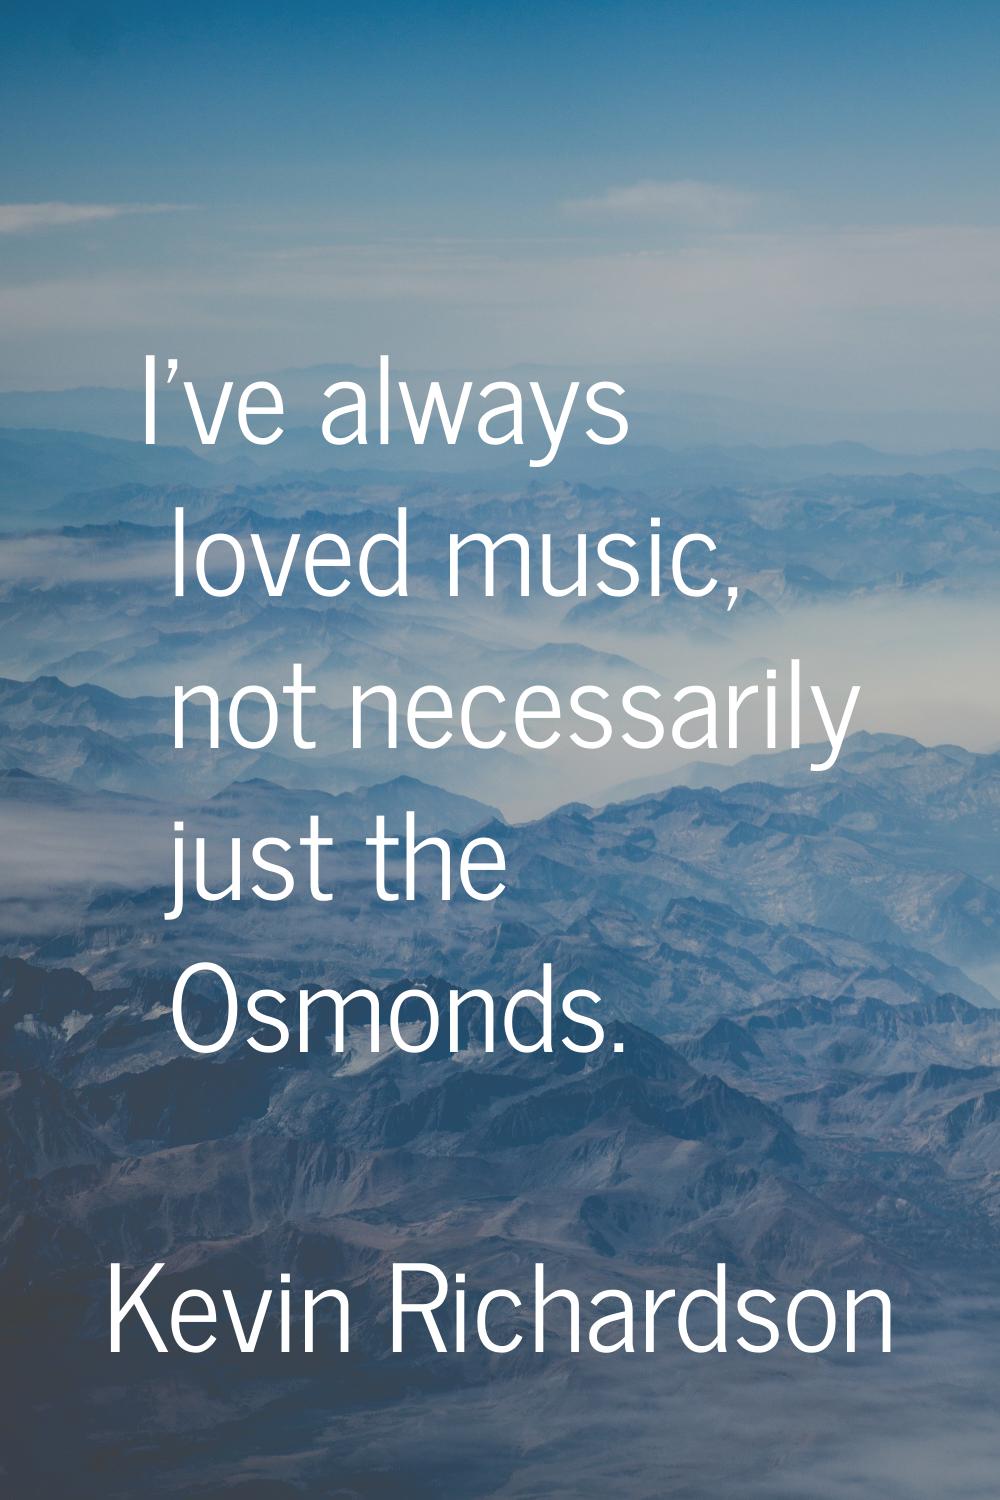 I've always loved music, not necessarily just the Osmonds.